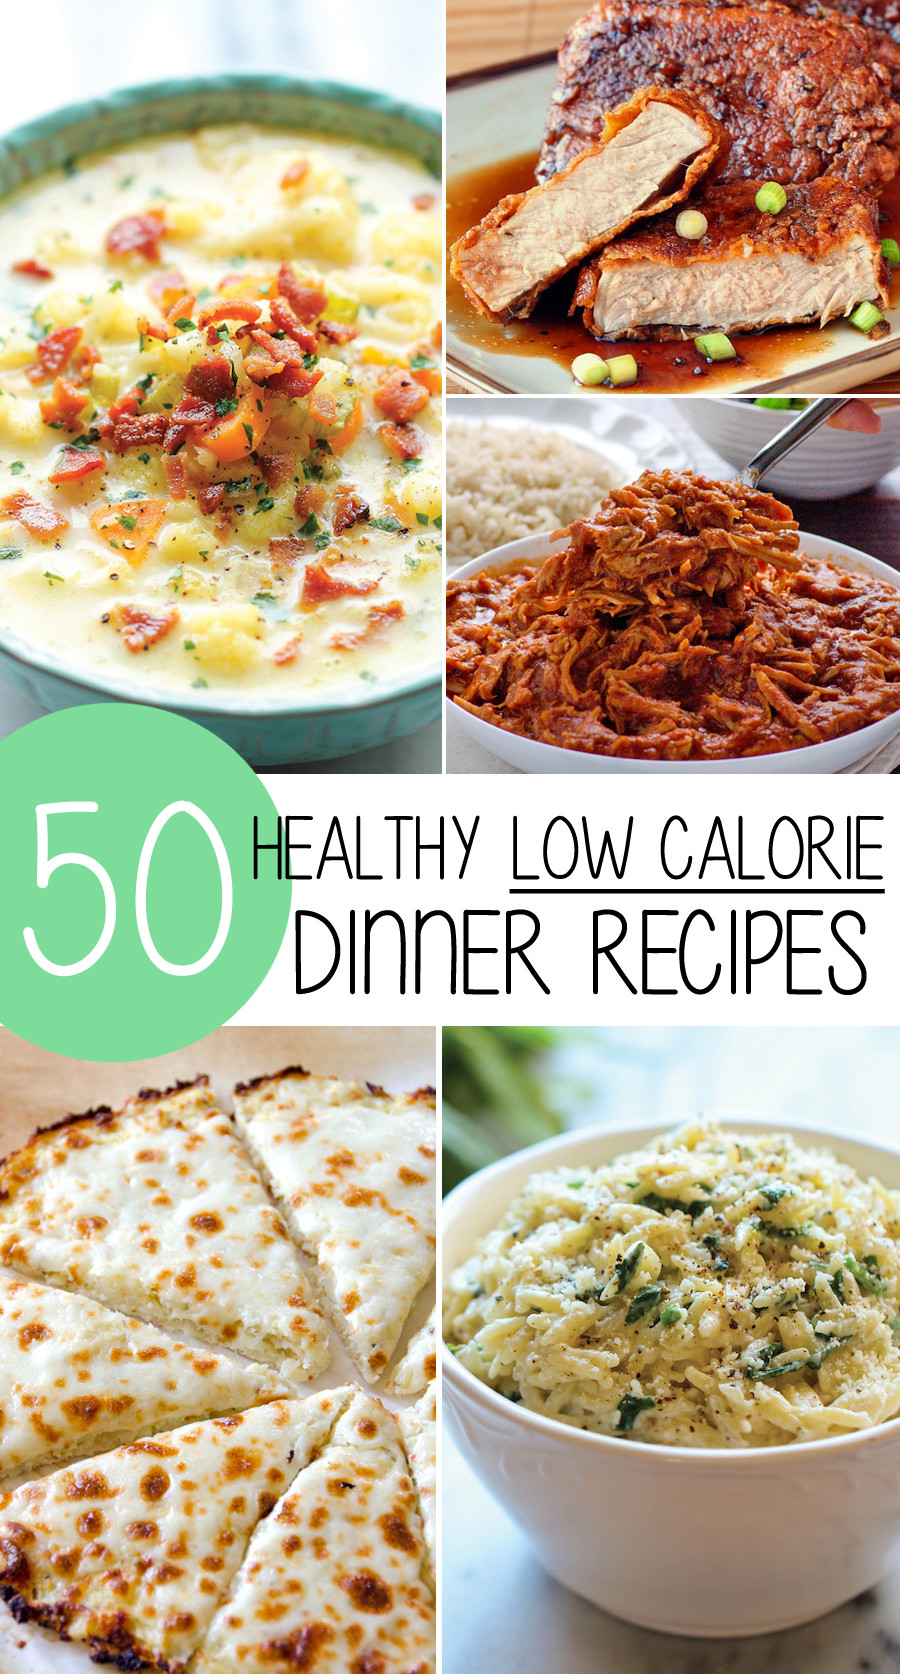 Low Calorie Easy Dinners
 50 Healthy Low Calorie Weight Loss Dinner Recipes